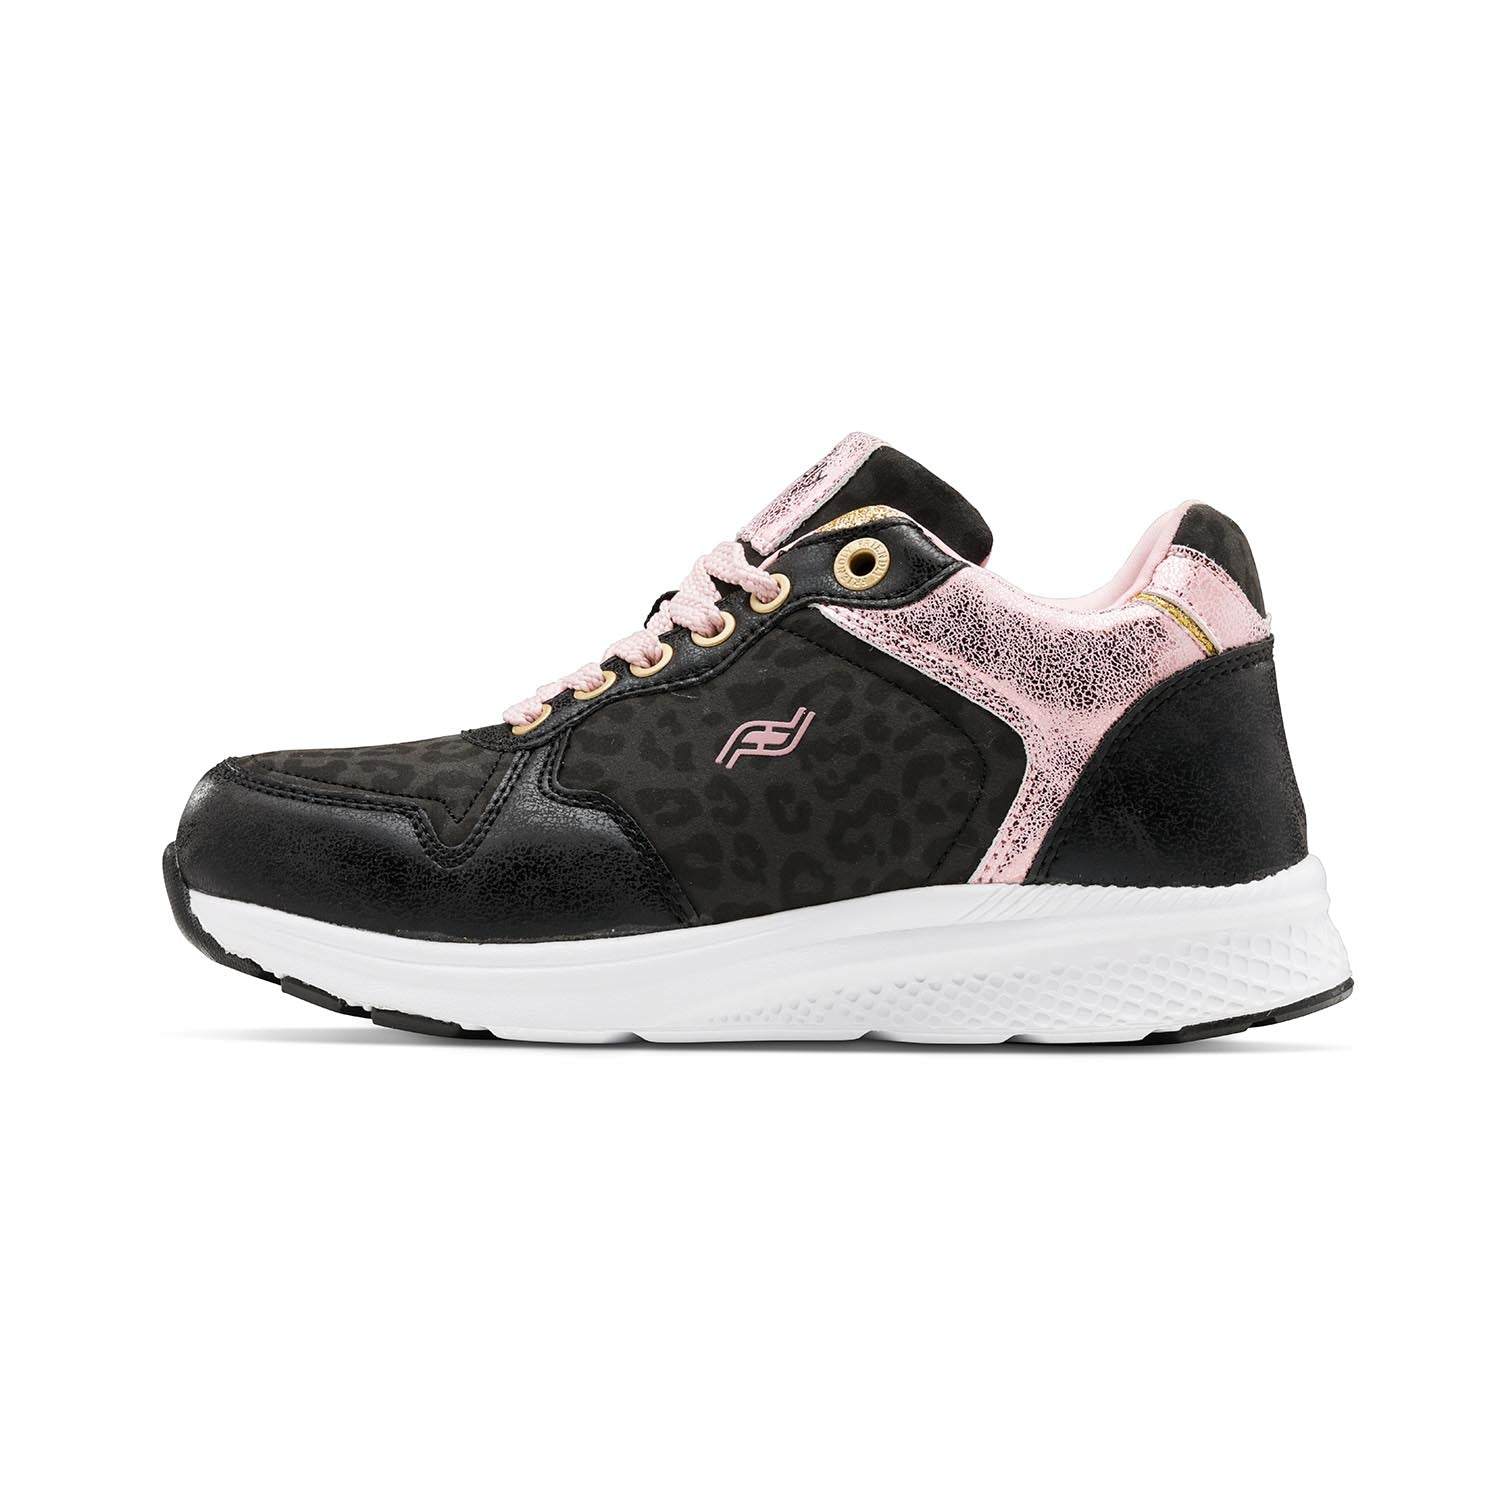 Black leopard print kids shoe with white bottom and light pink accents and rear zipper access.